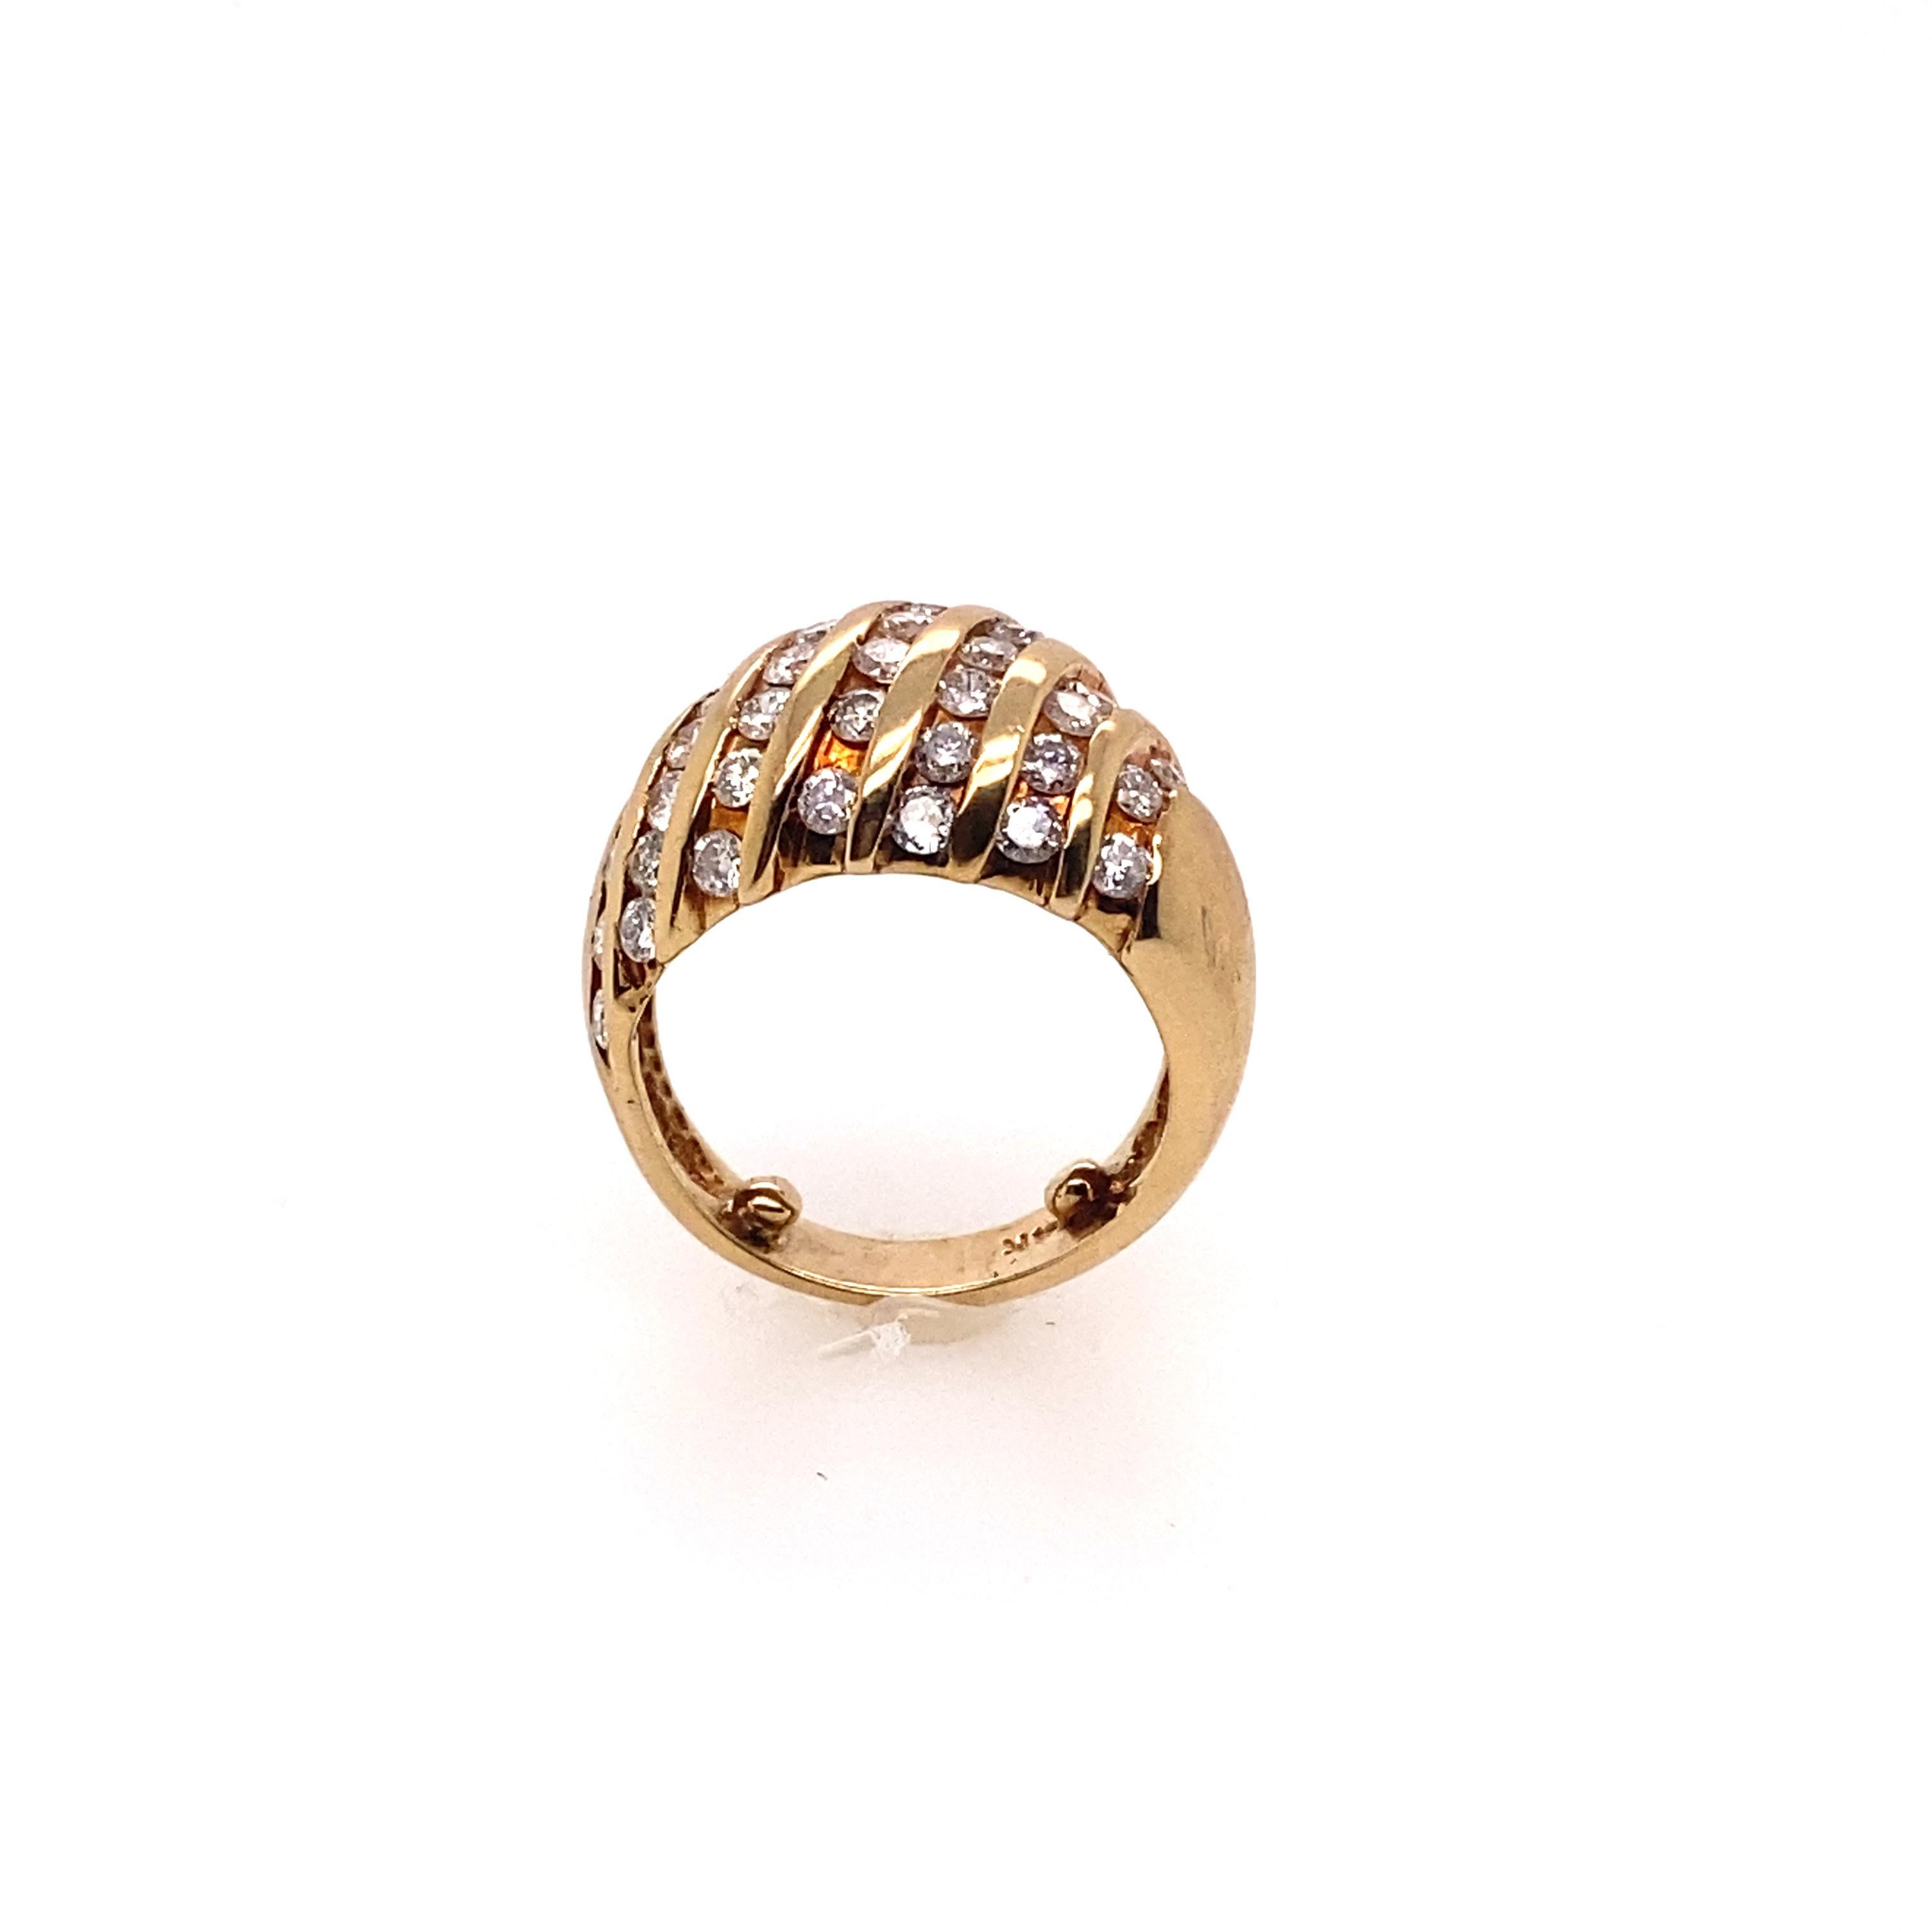 14 Karat yellow gold dome ring set with 47 diamonds totaling about 1.50 carats of round diamonds. Dome rings have a natural air of sophisticated vintage playfulness. Wear this chic accessory every day.

Diamonds Weight: 1.50 carat
Diamonds Shape :